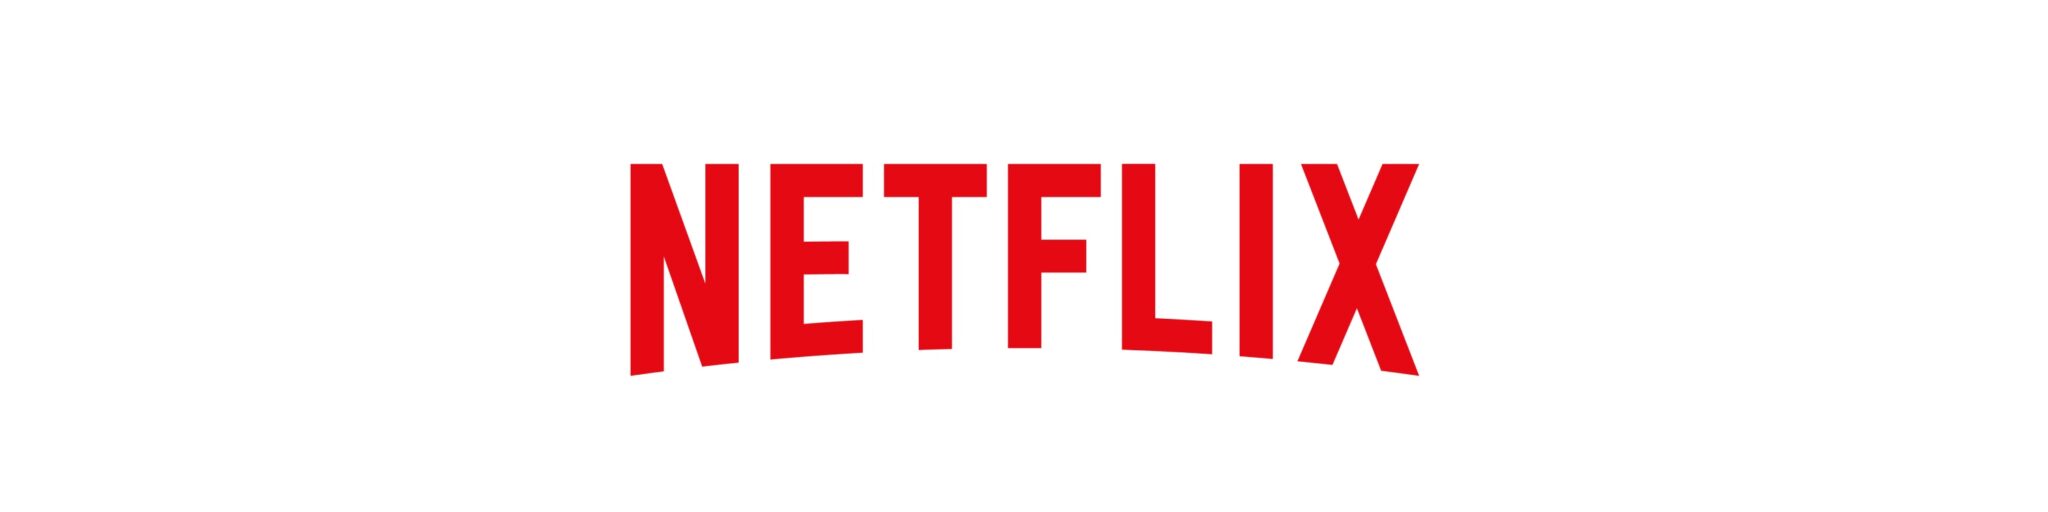 Netflix in the top 8 Big Data solutions